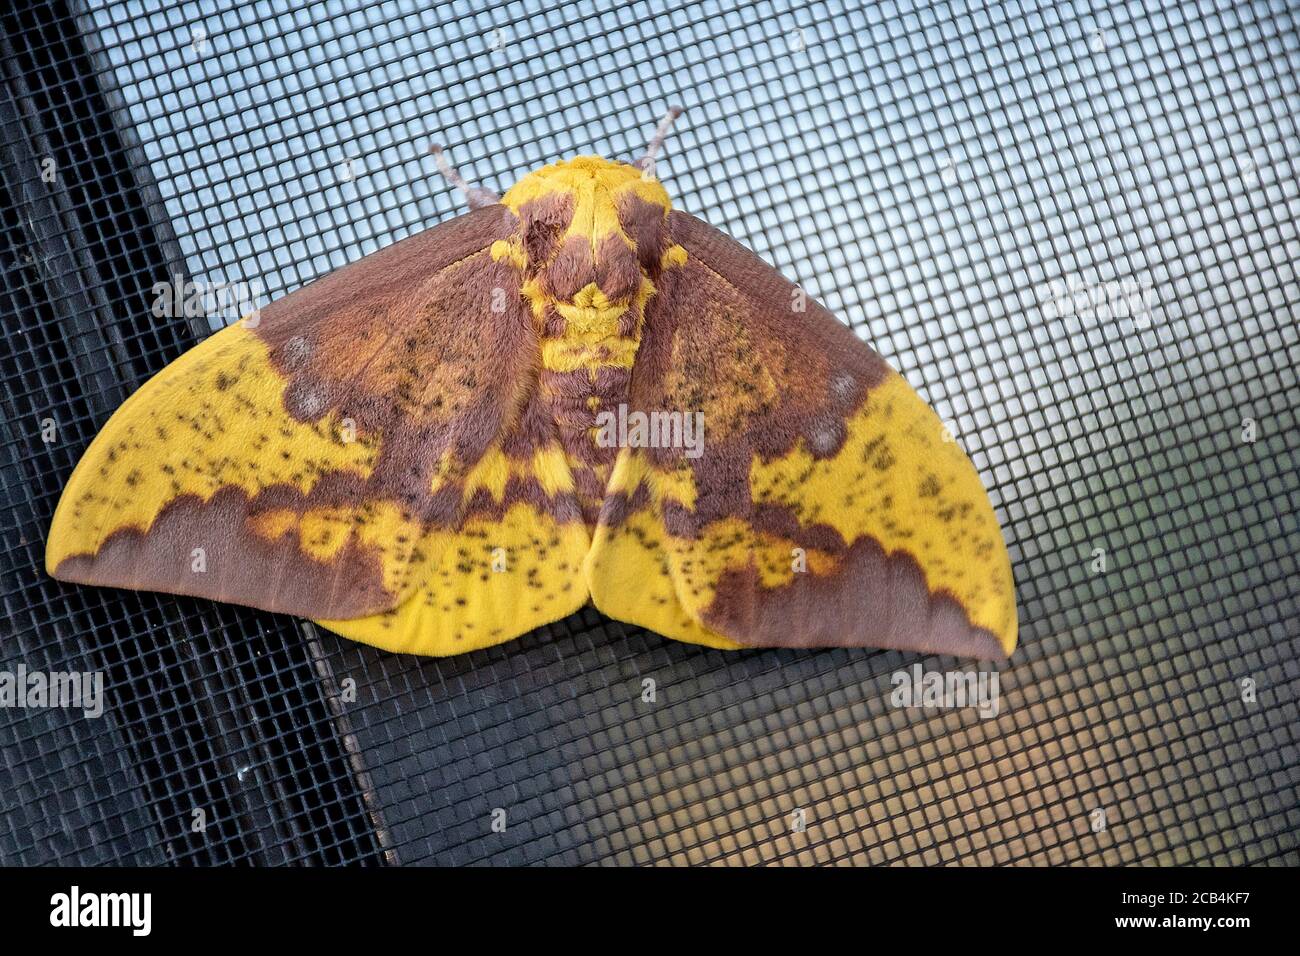 extreme close up of imperial moth on window screen Stock Photo